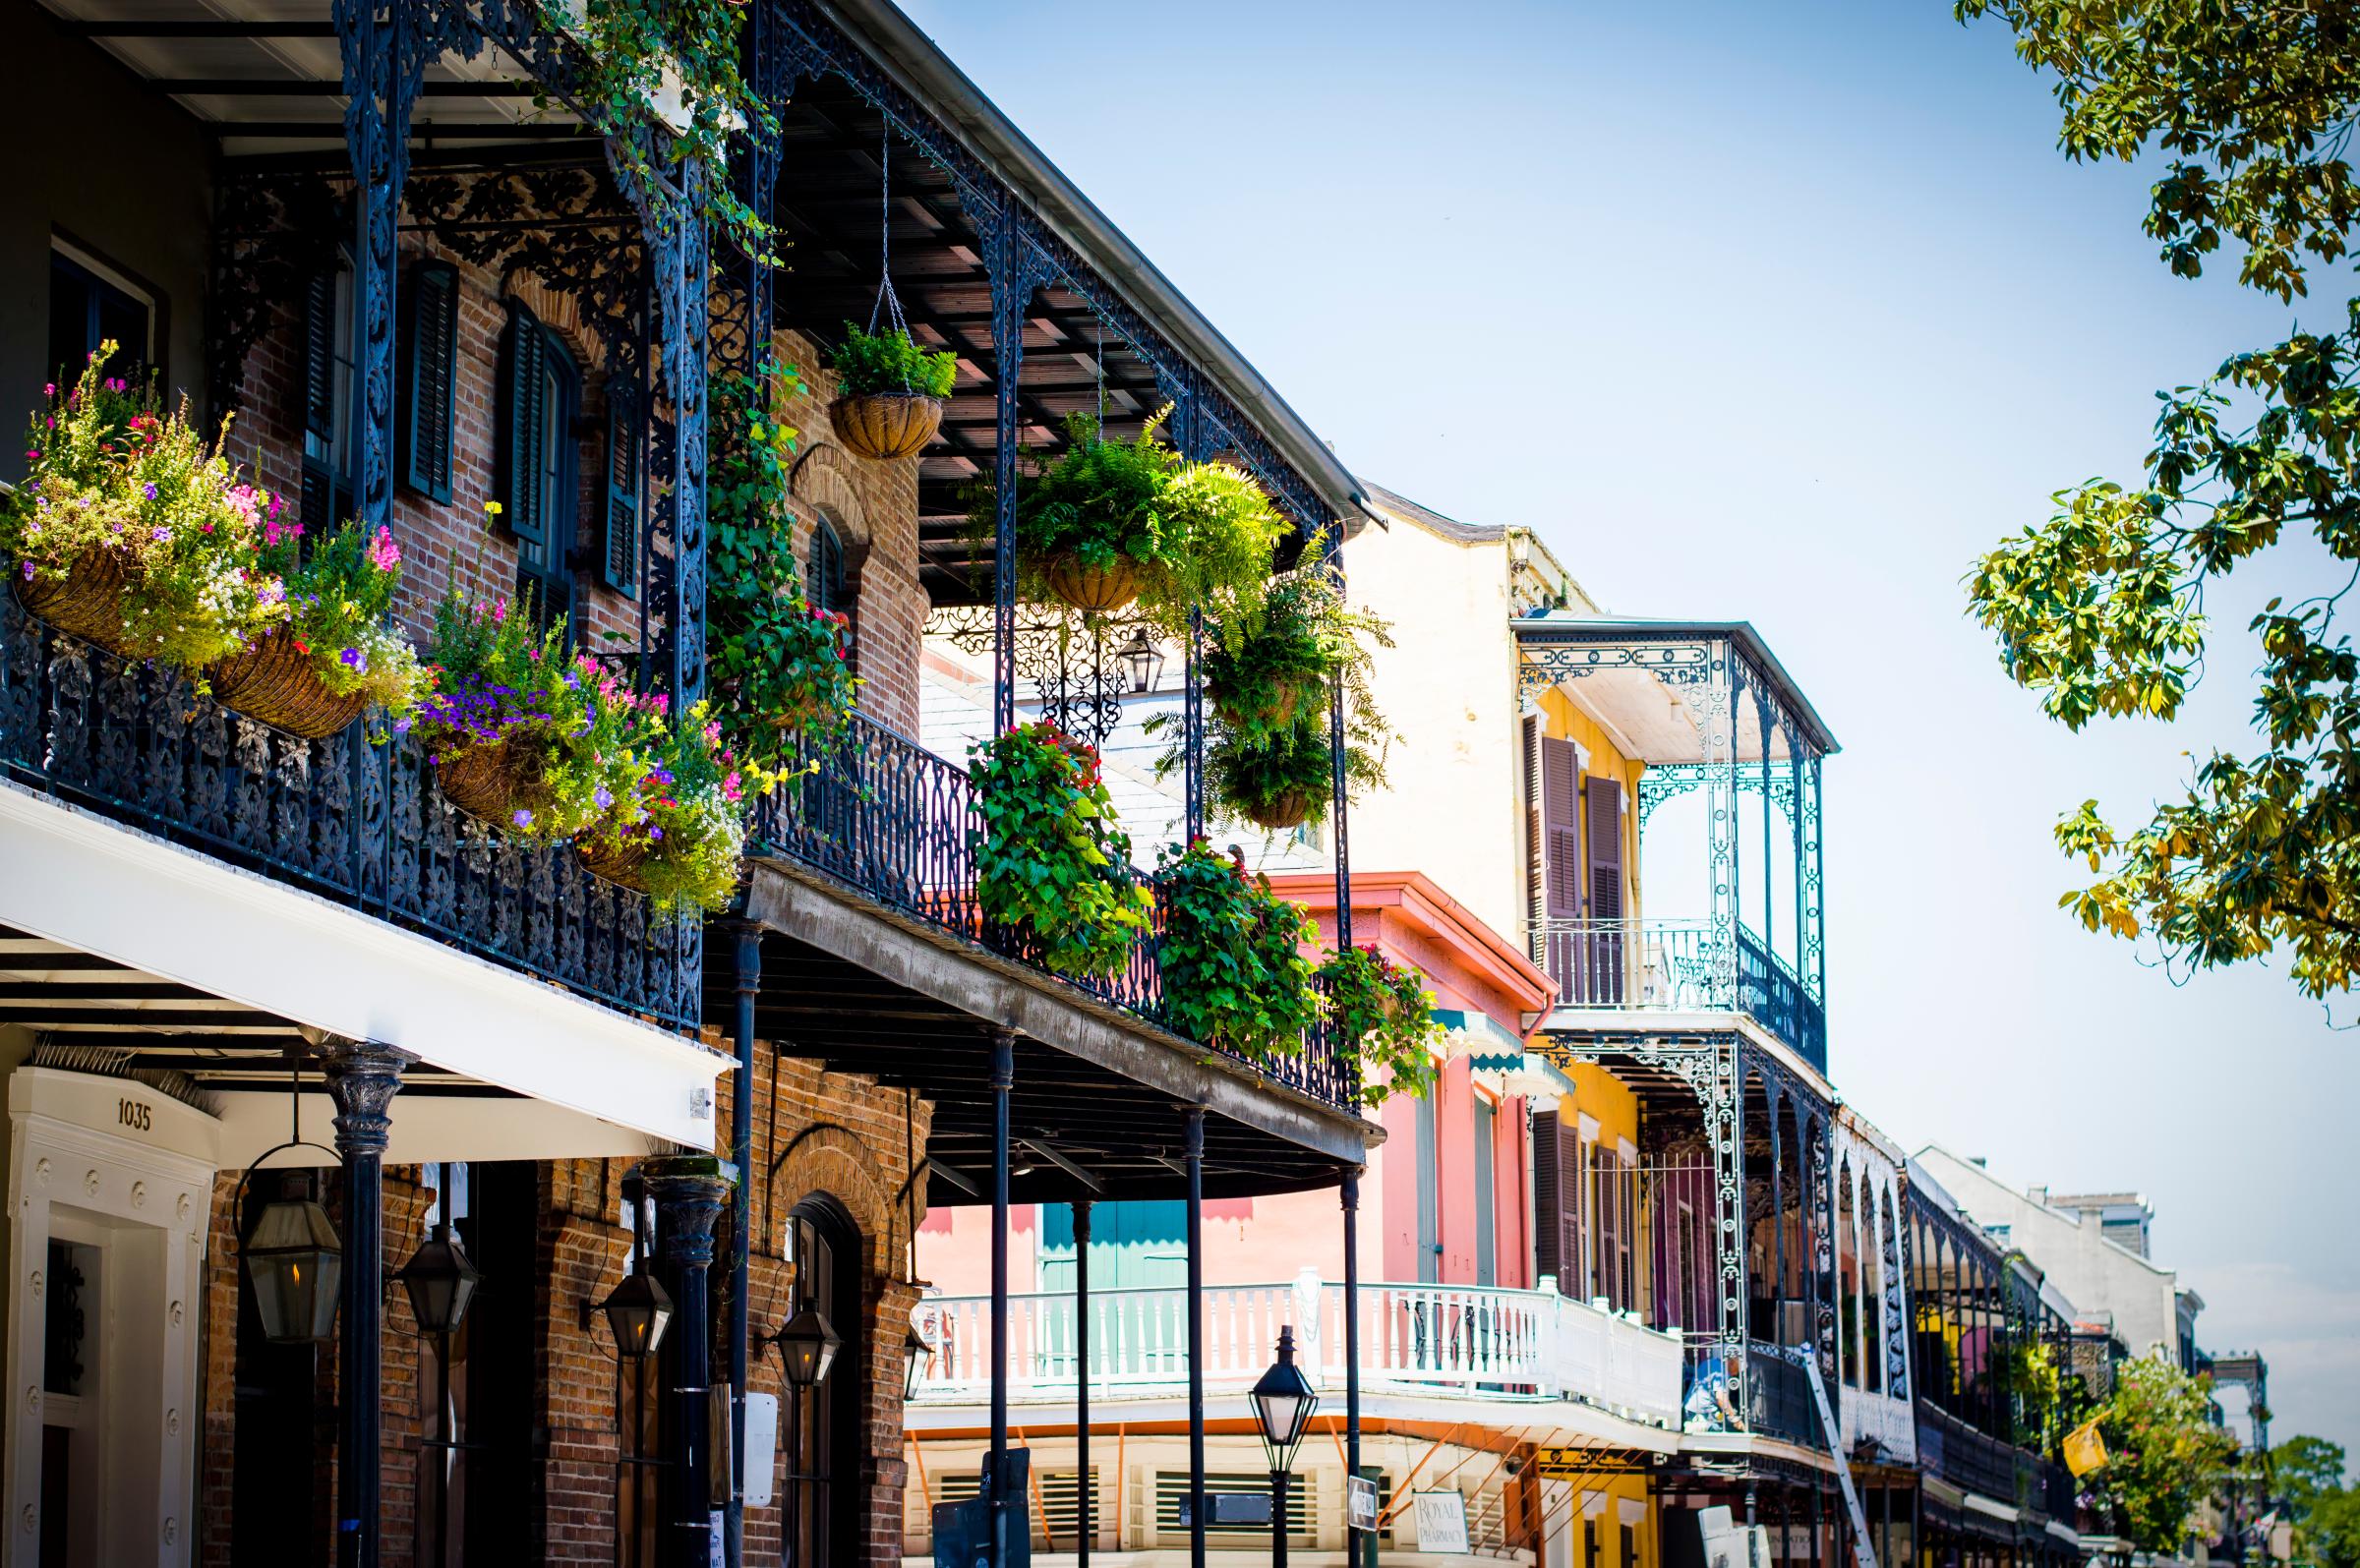 Potted Plants In Balcony Of Building At French Quarter